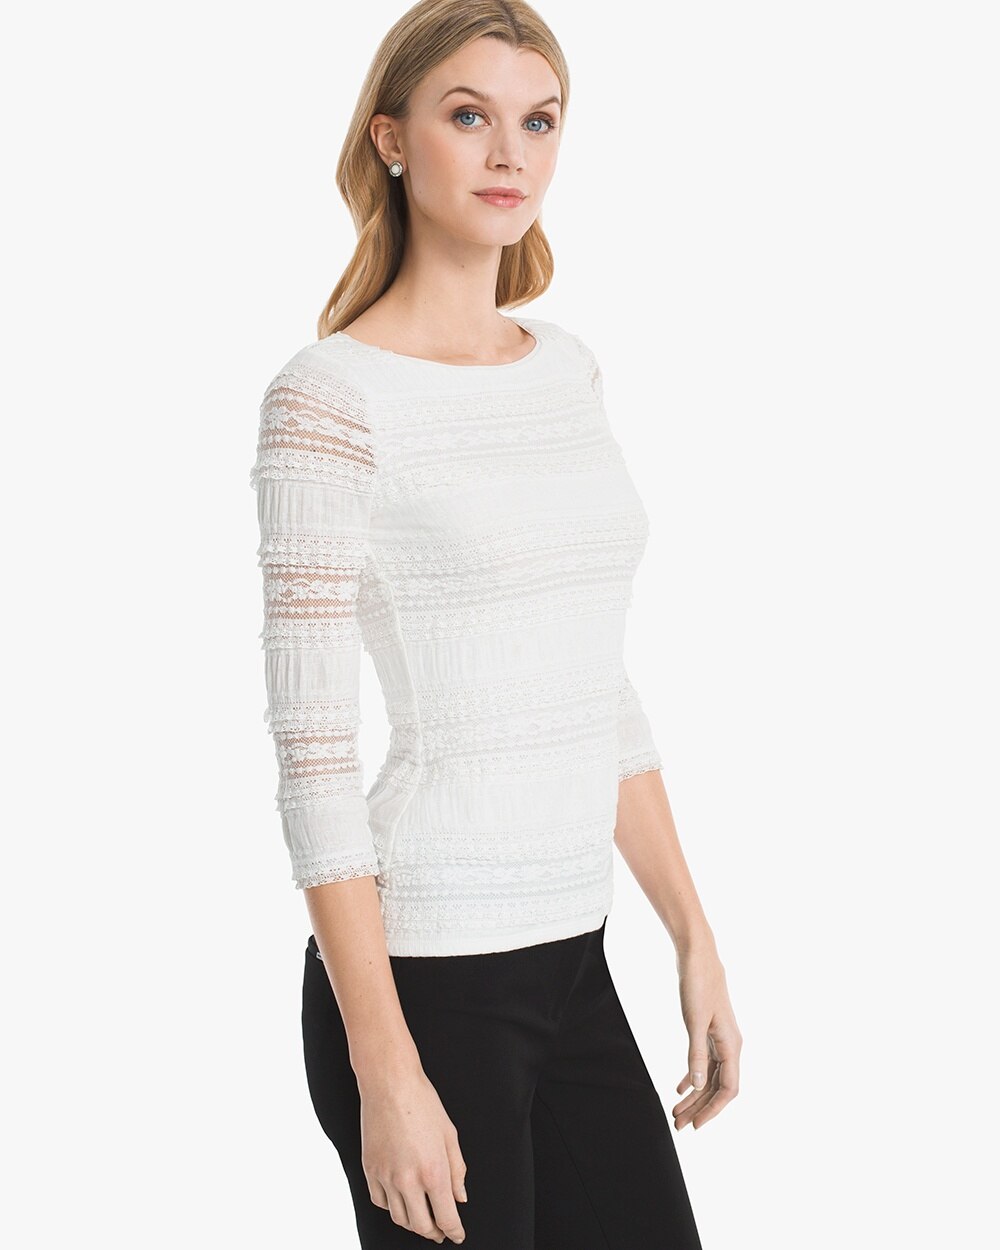 3/4 Sleeve Ruffle-Lace Knit Top - WHBM